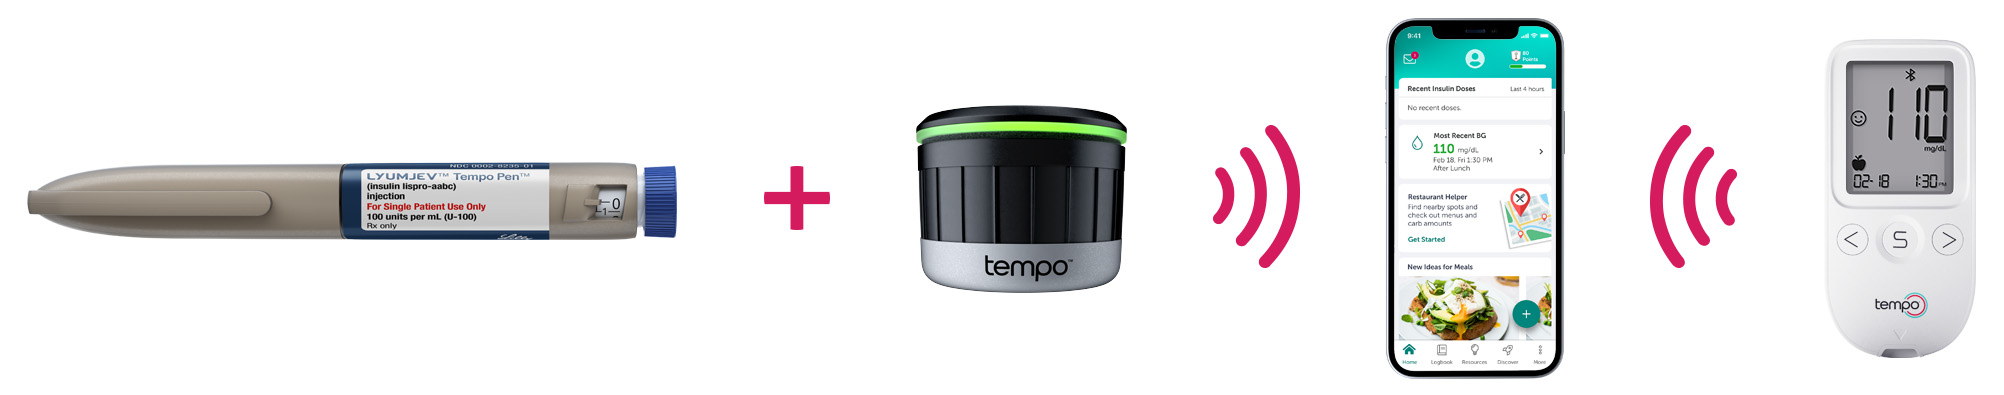 graphic on how to attach the Tempo Smart Button™ to the Tempo Pen™ and pair with your TempoSmart™ App